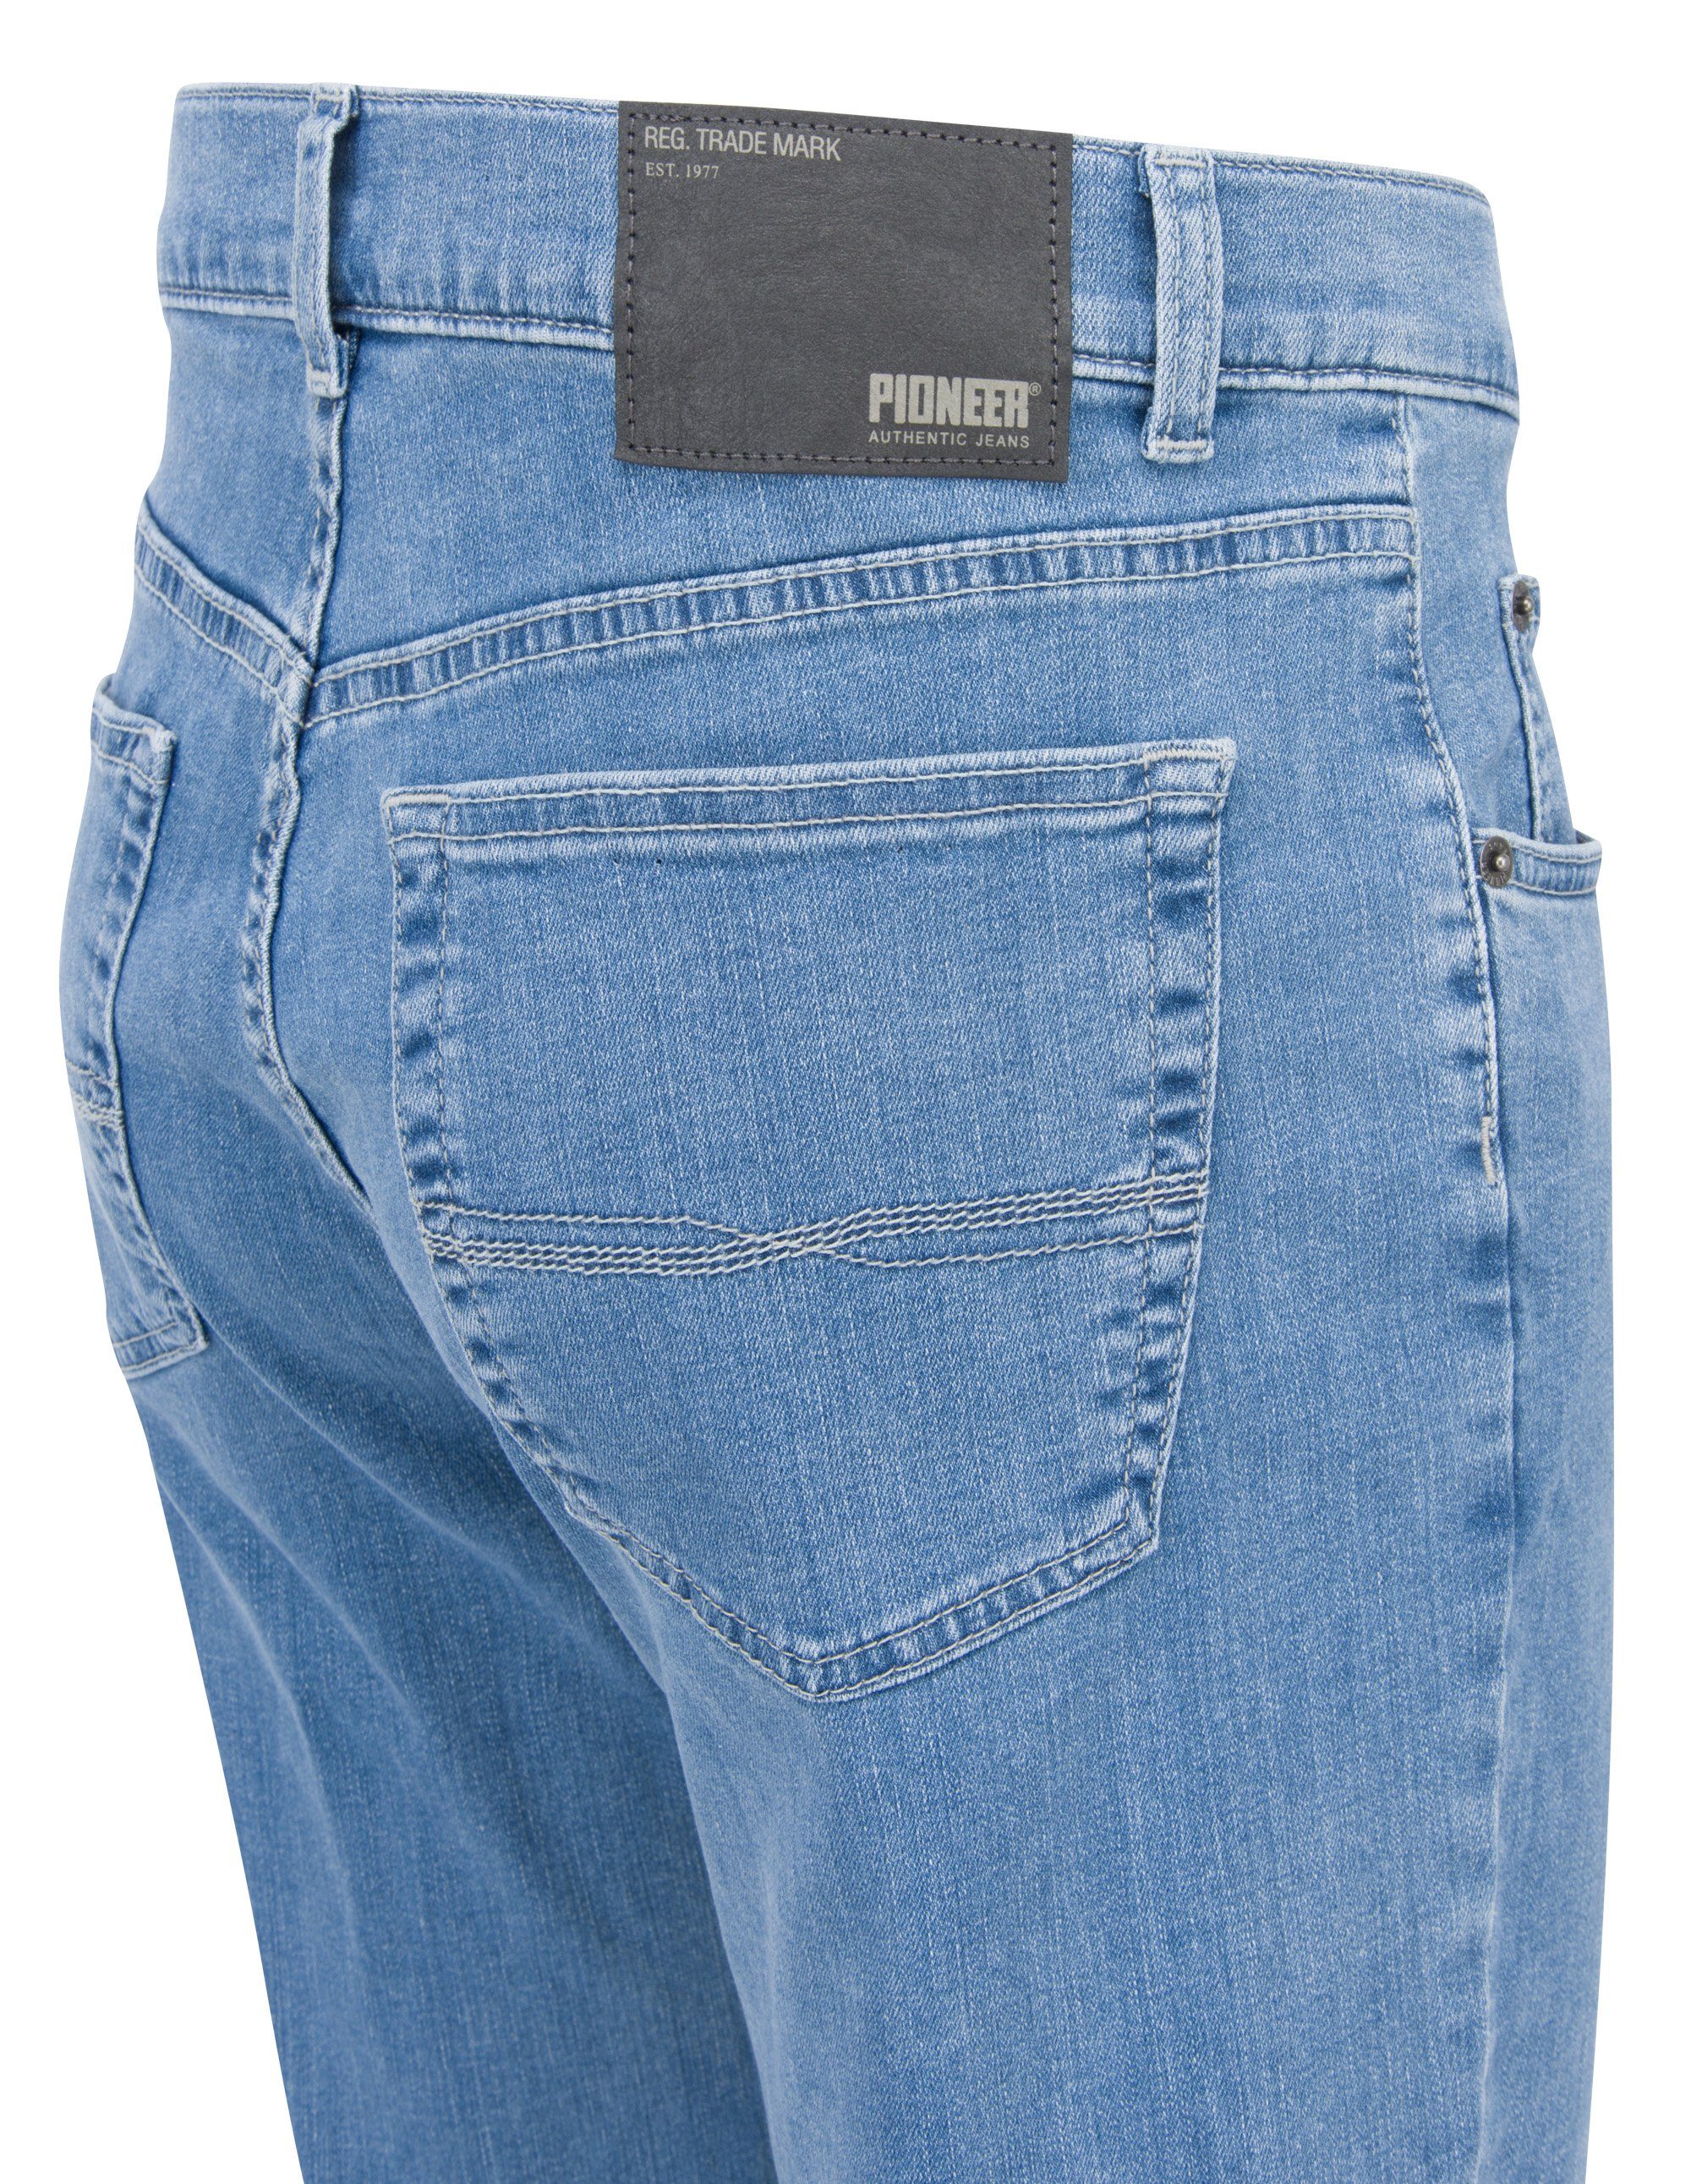 5-Pocket-Jeans bleached PIONEER 9818.08 RON Pioneer 1144 Authentic Jeans